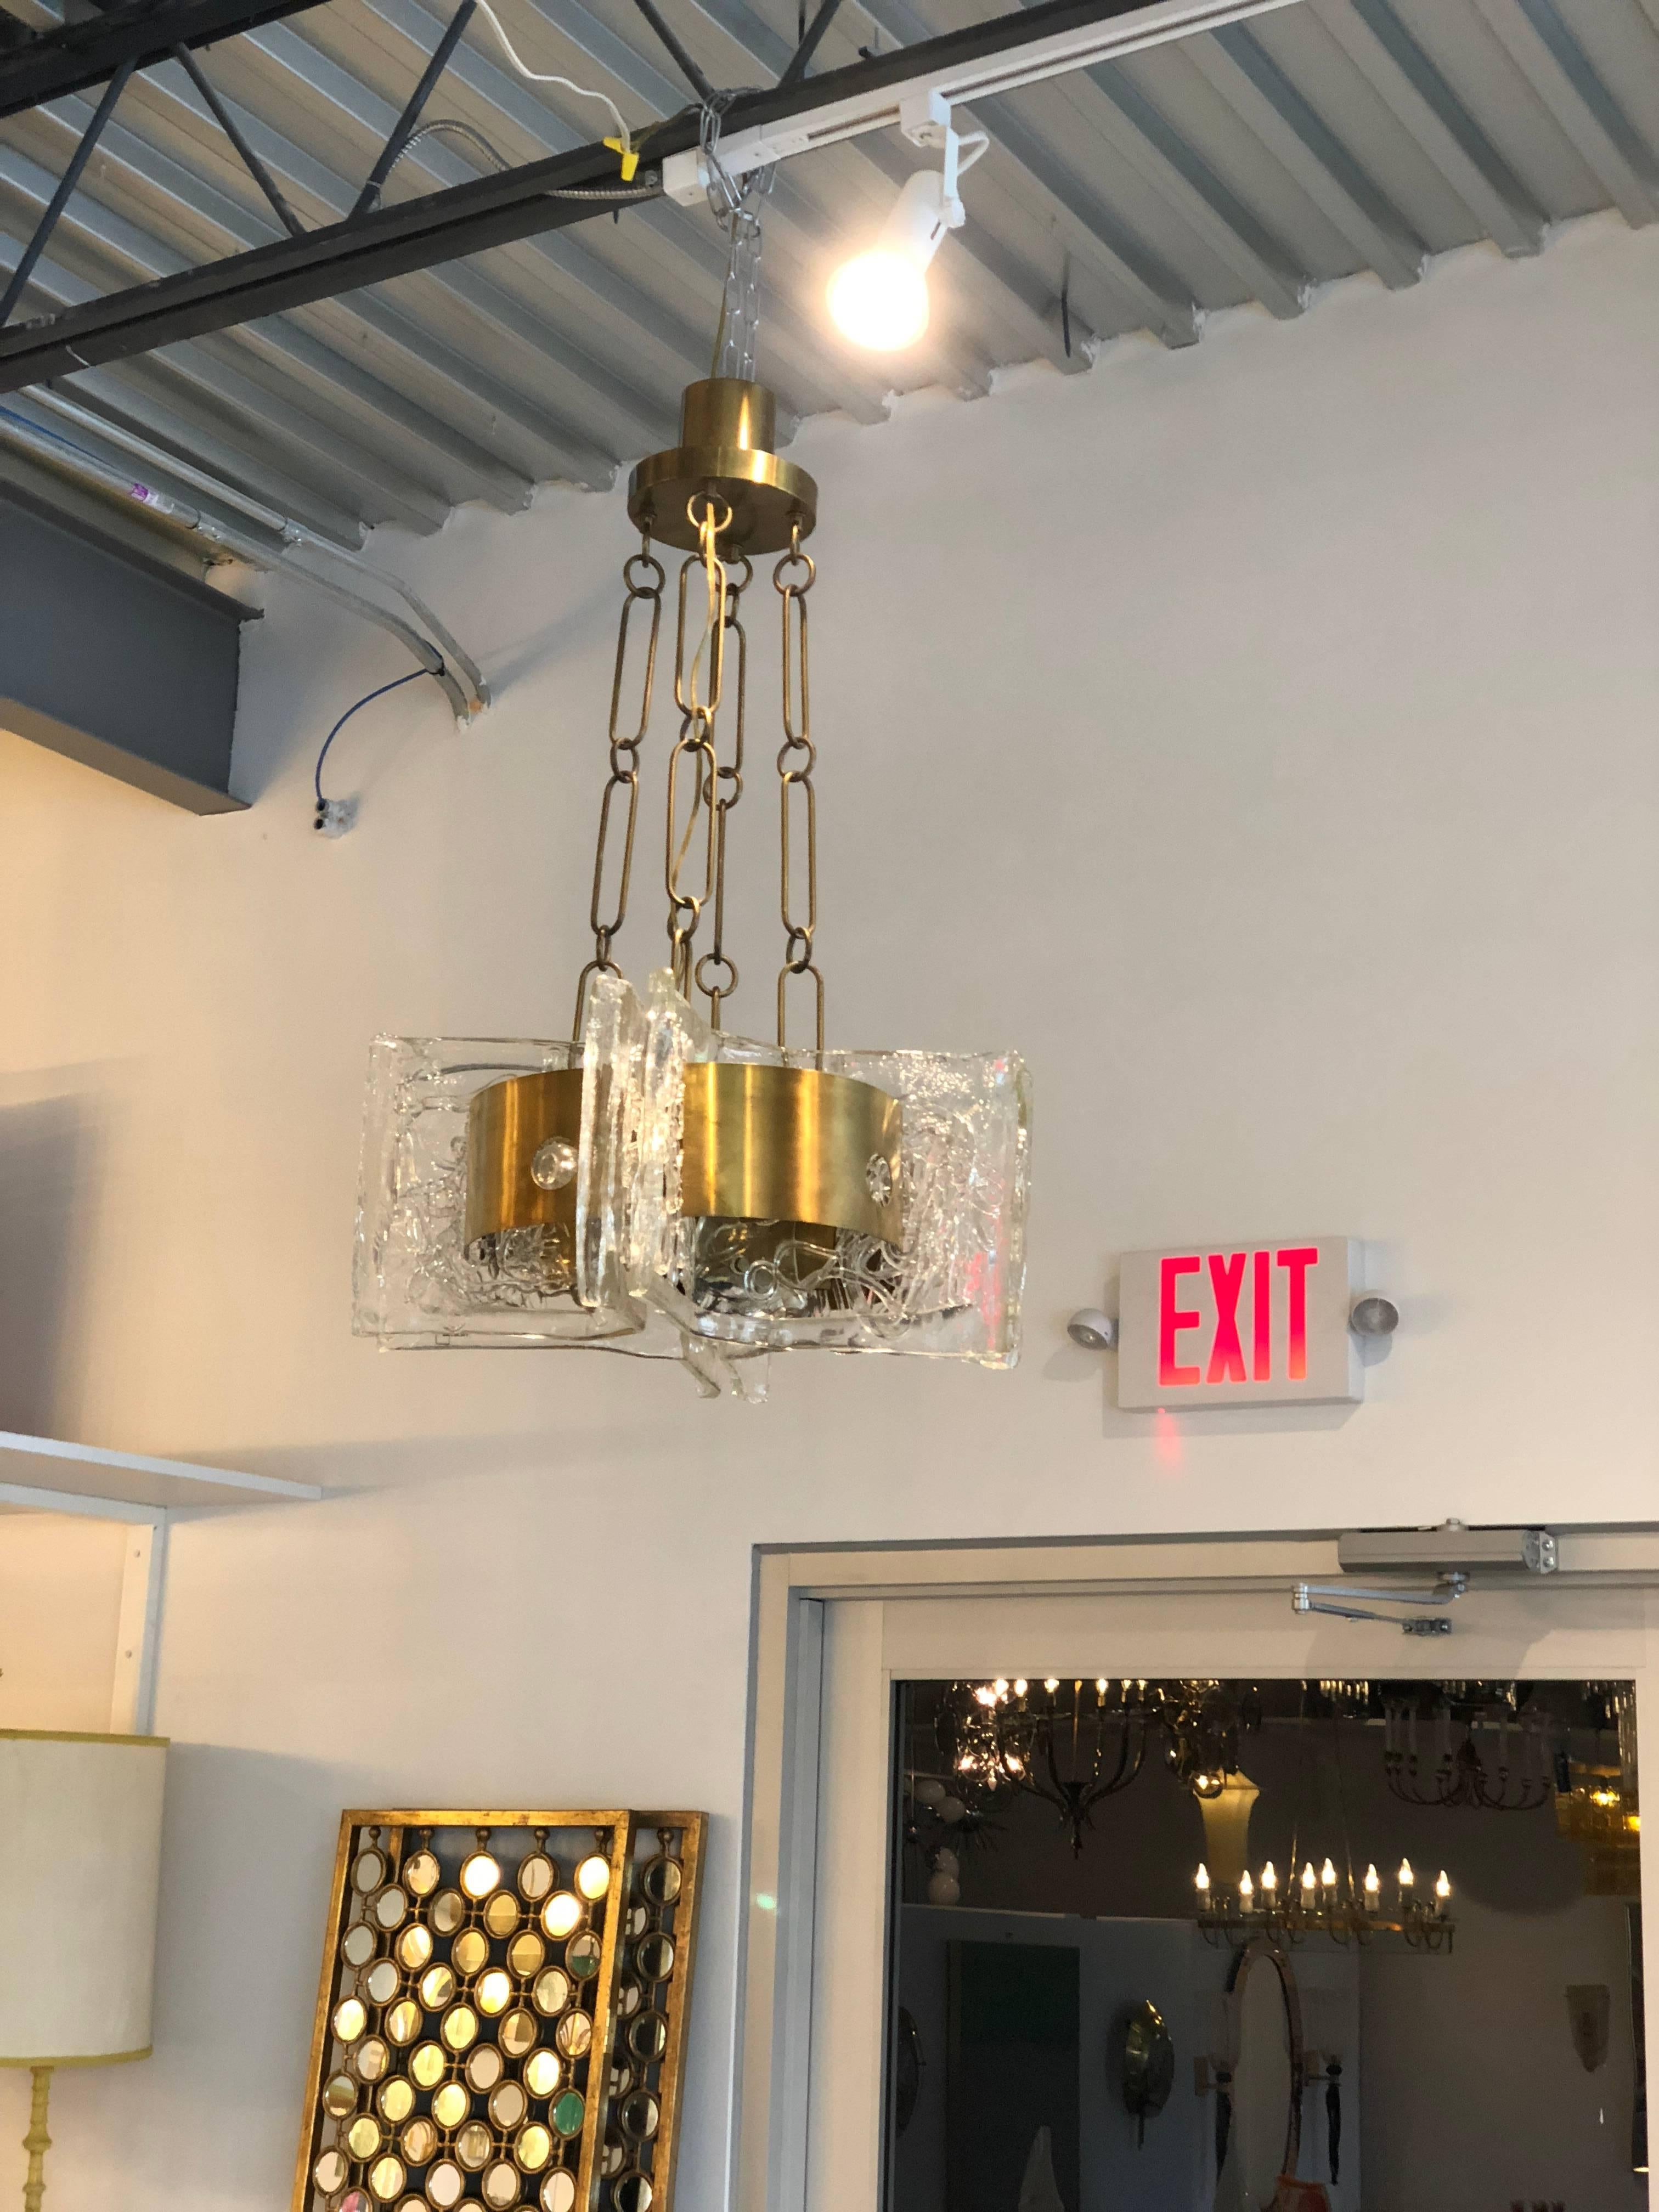 Offered is a Mid-Century Modern Italian signed Esperia textured Murano glass and brass four light chandelier with mod jewelry like chain connection and canopy.
The design on the clear Murano glass 4 curved panels is called “Spaghetti”.
This